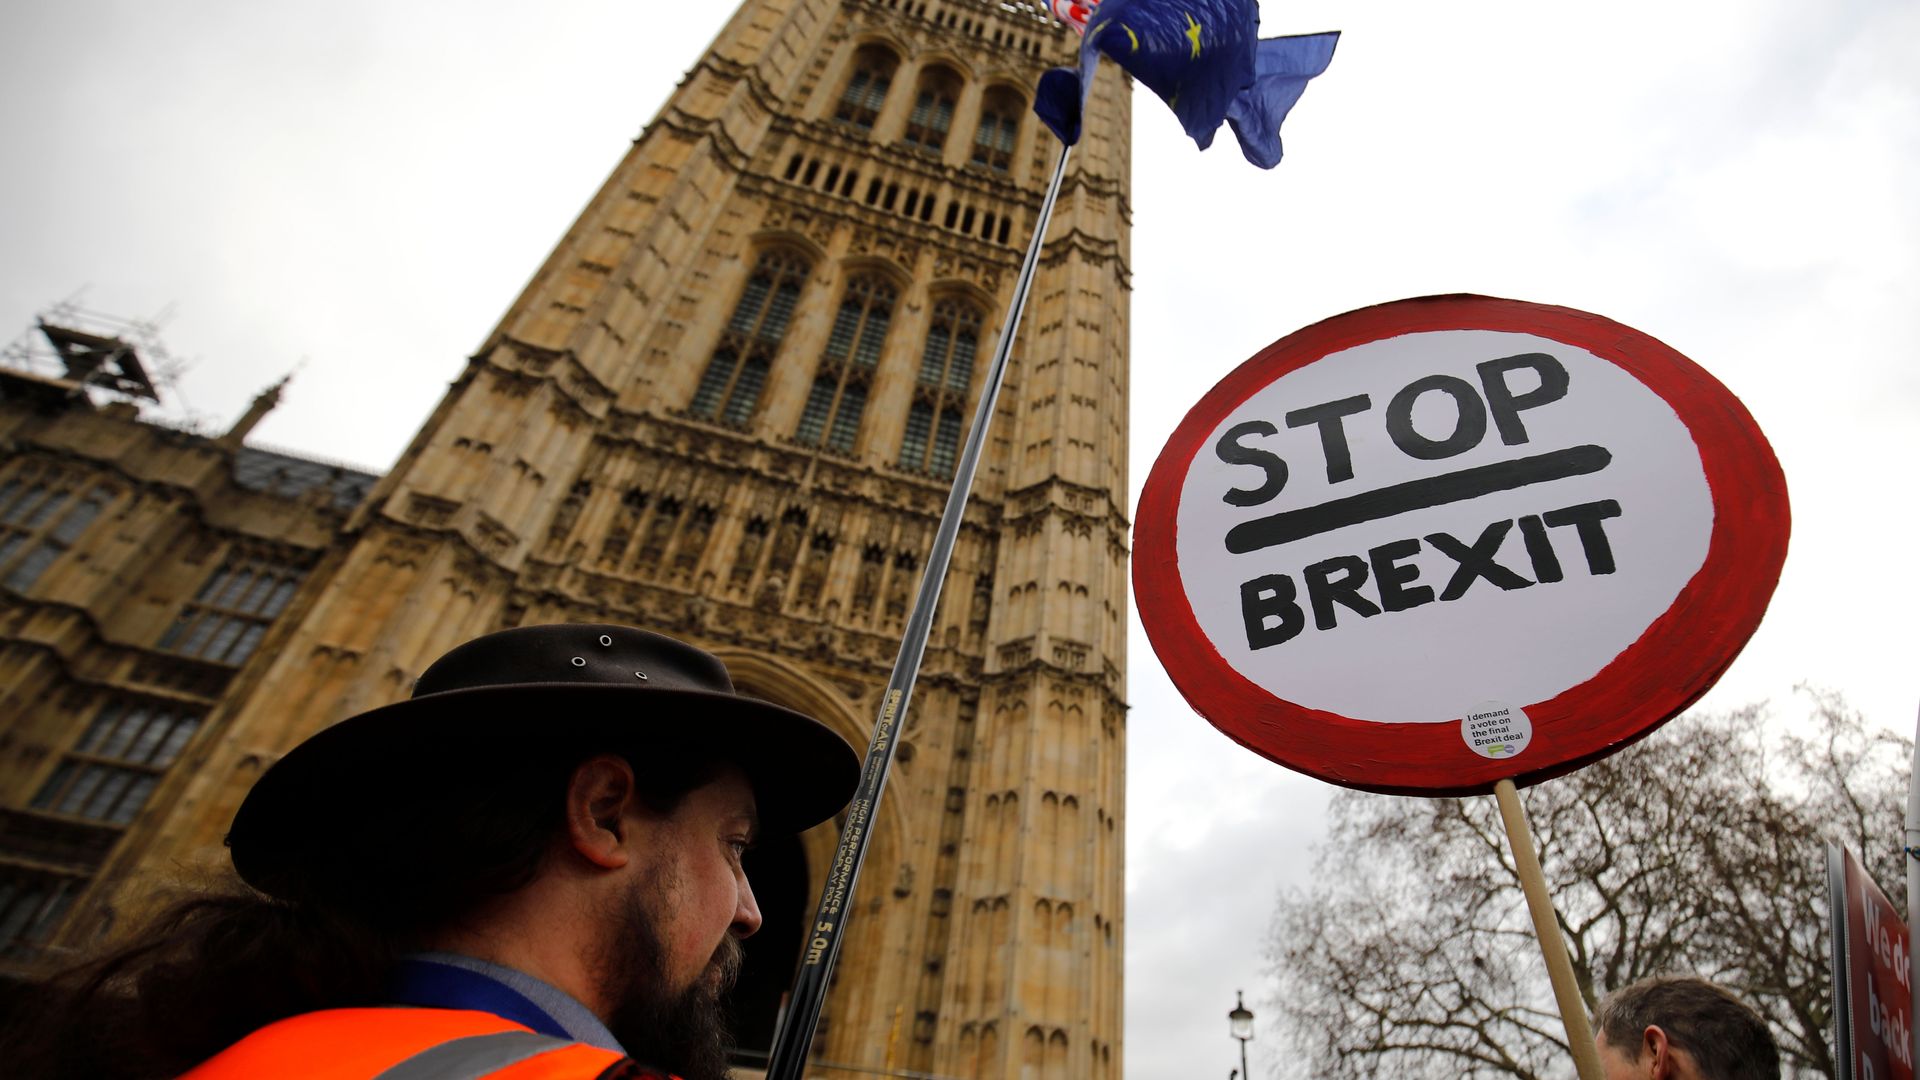 Man in London with a stop brexit sign